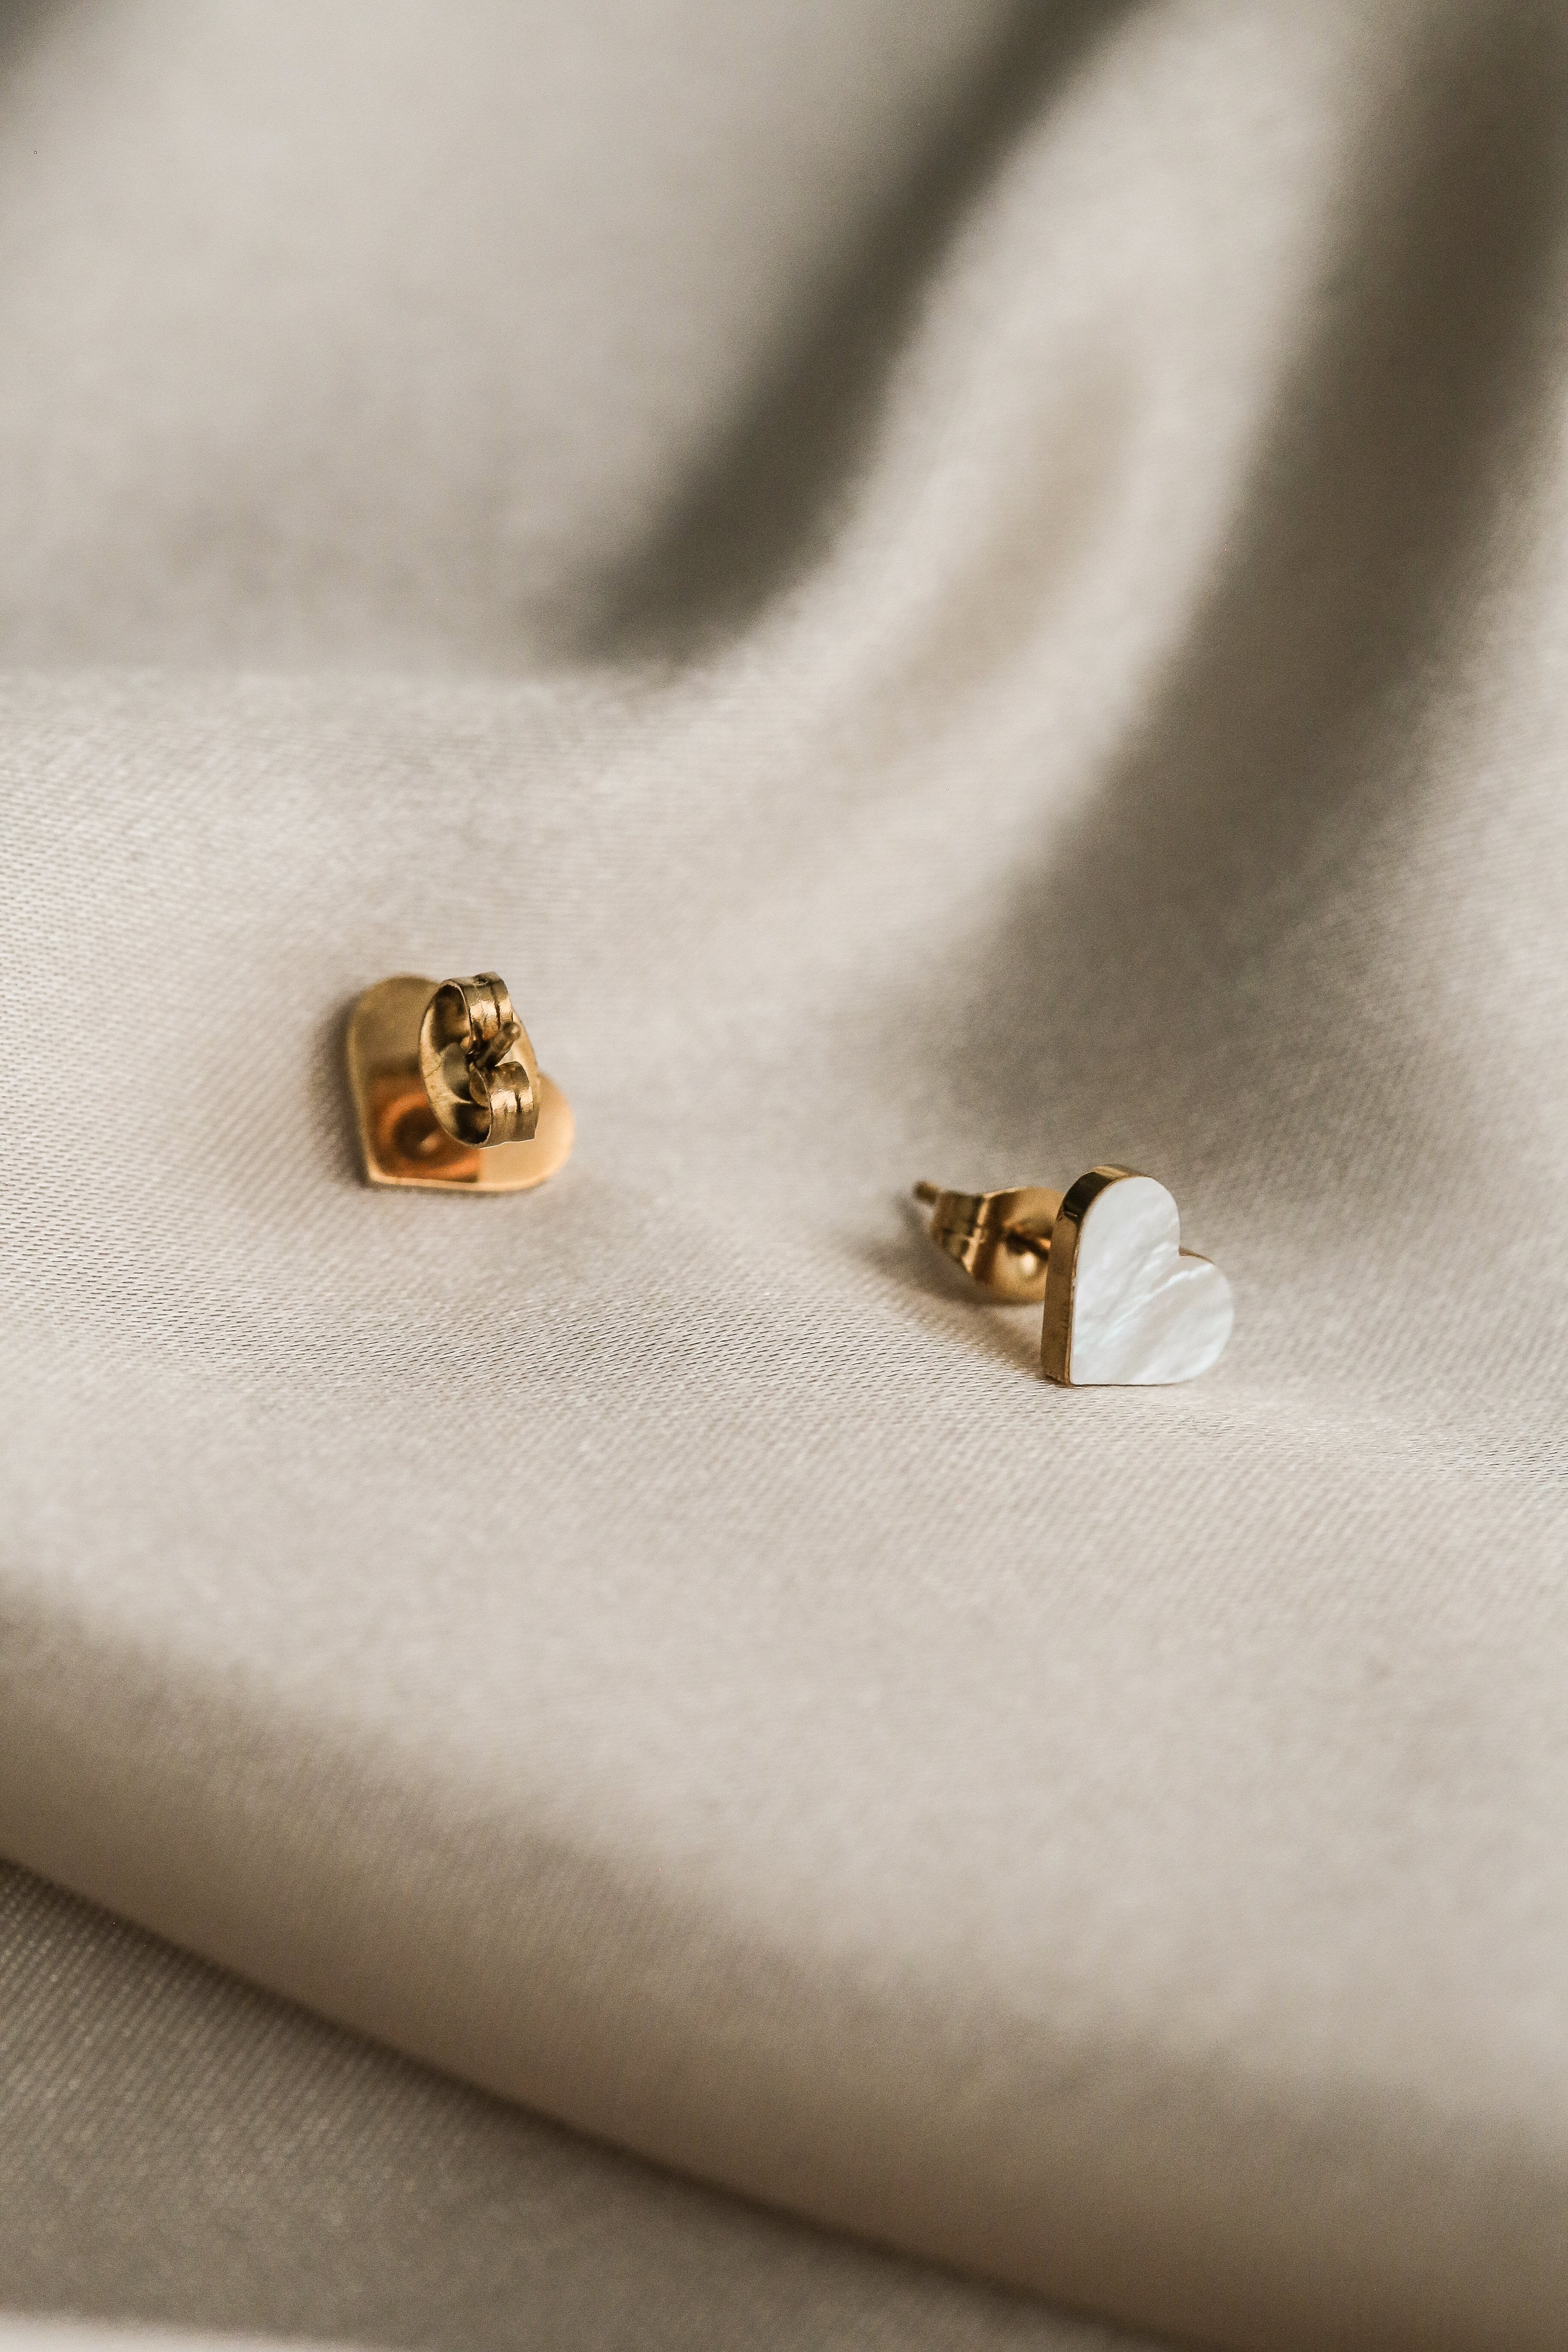 Chloé Studs - Boutique Minimaliste has waterproof, durable, elegant and vintage inspired jewelry